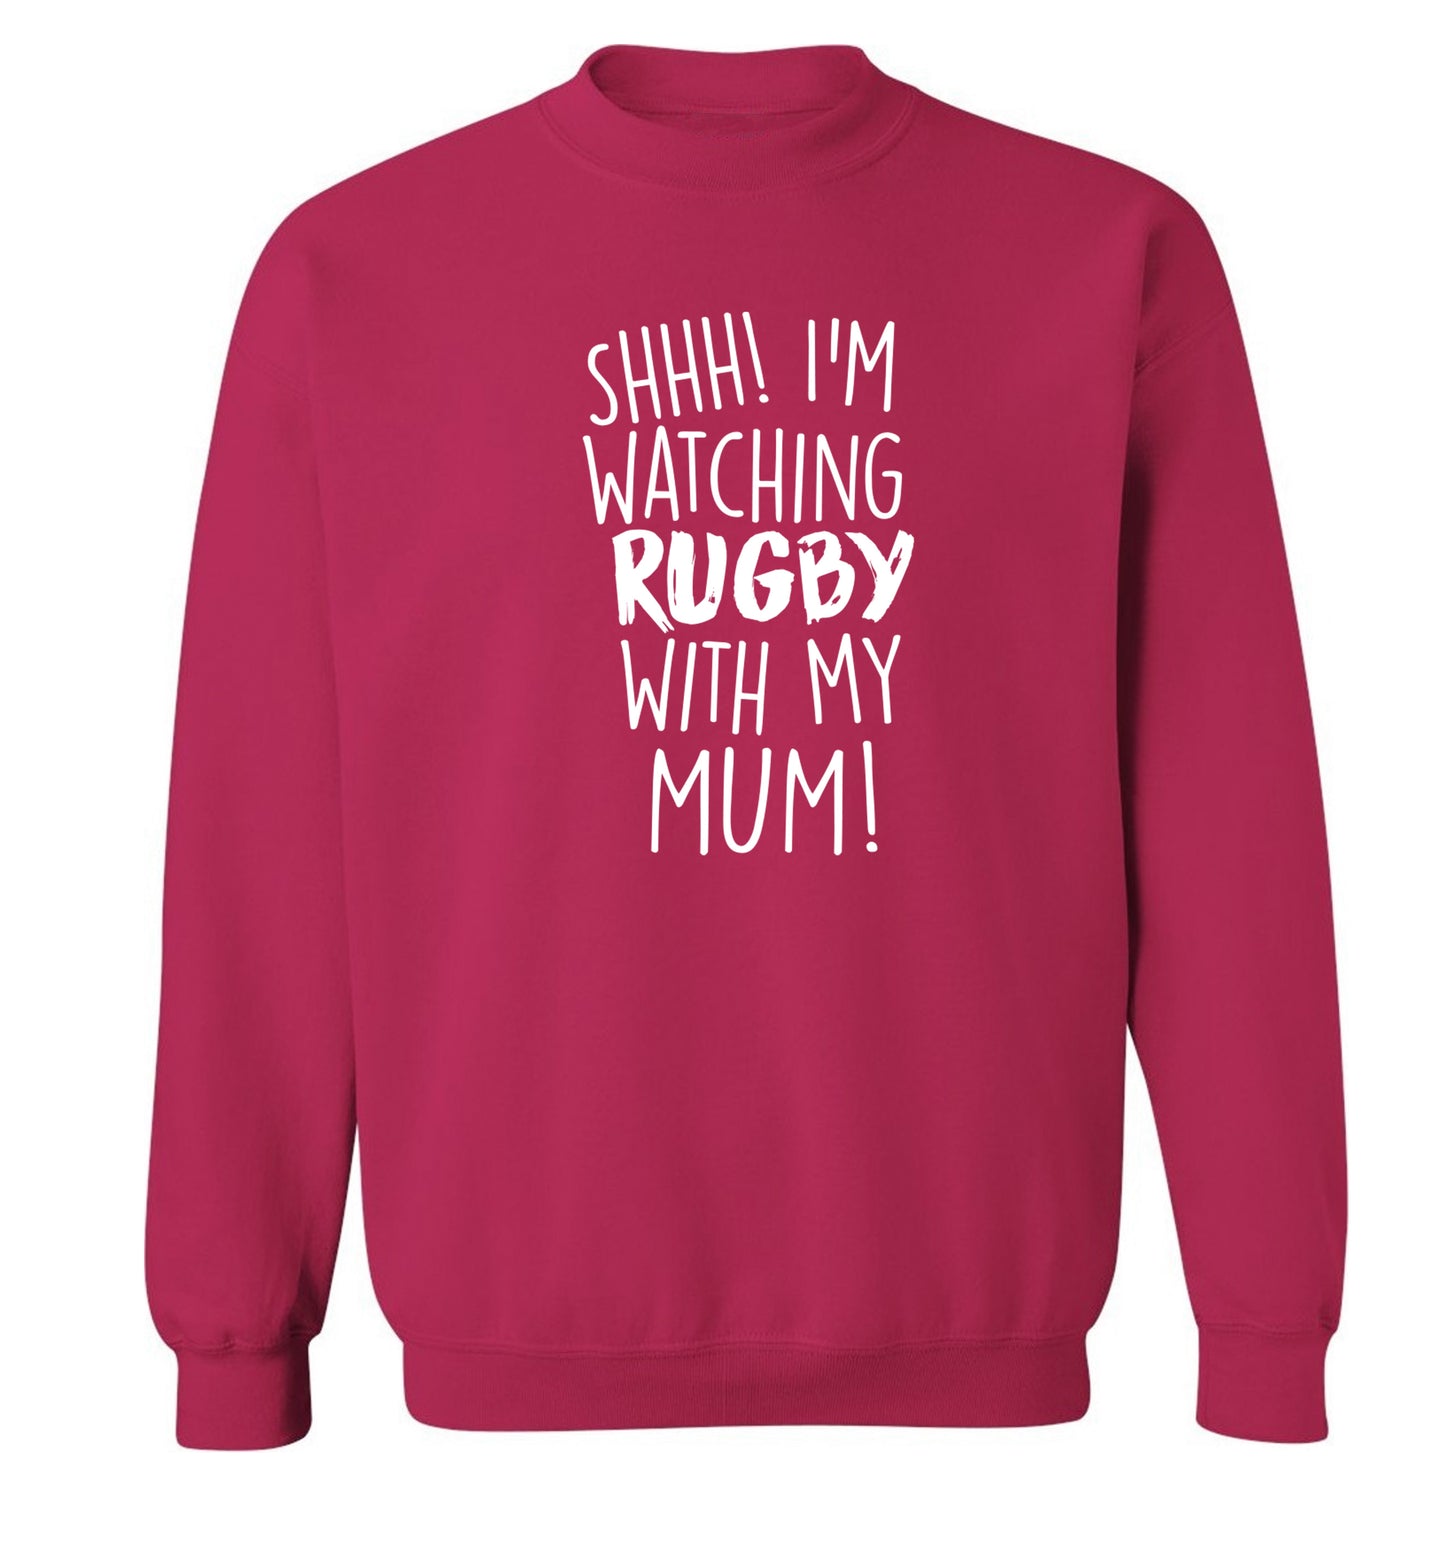 Shh... I'm watching rugby with my mum Adult's unisex pink Sweater 2XL